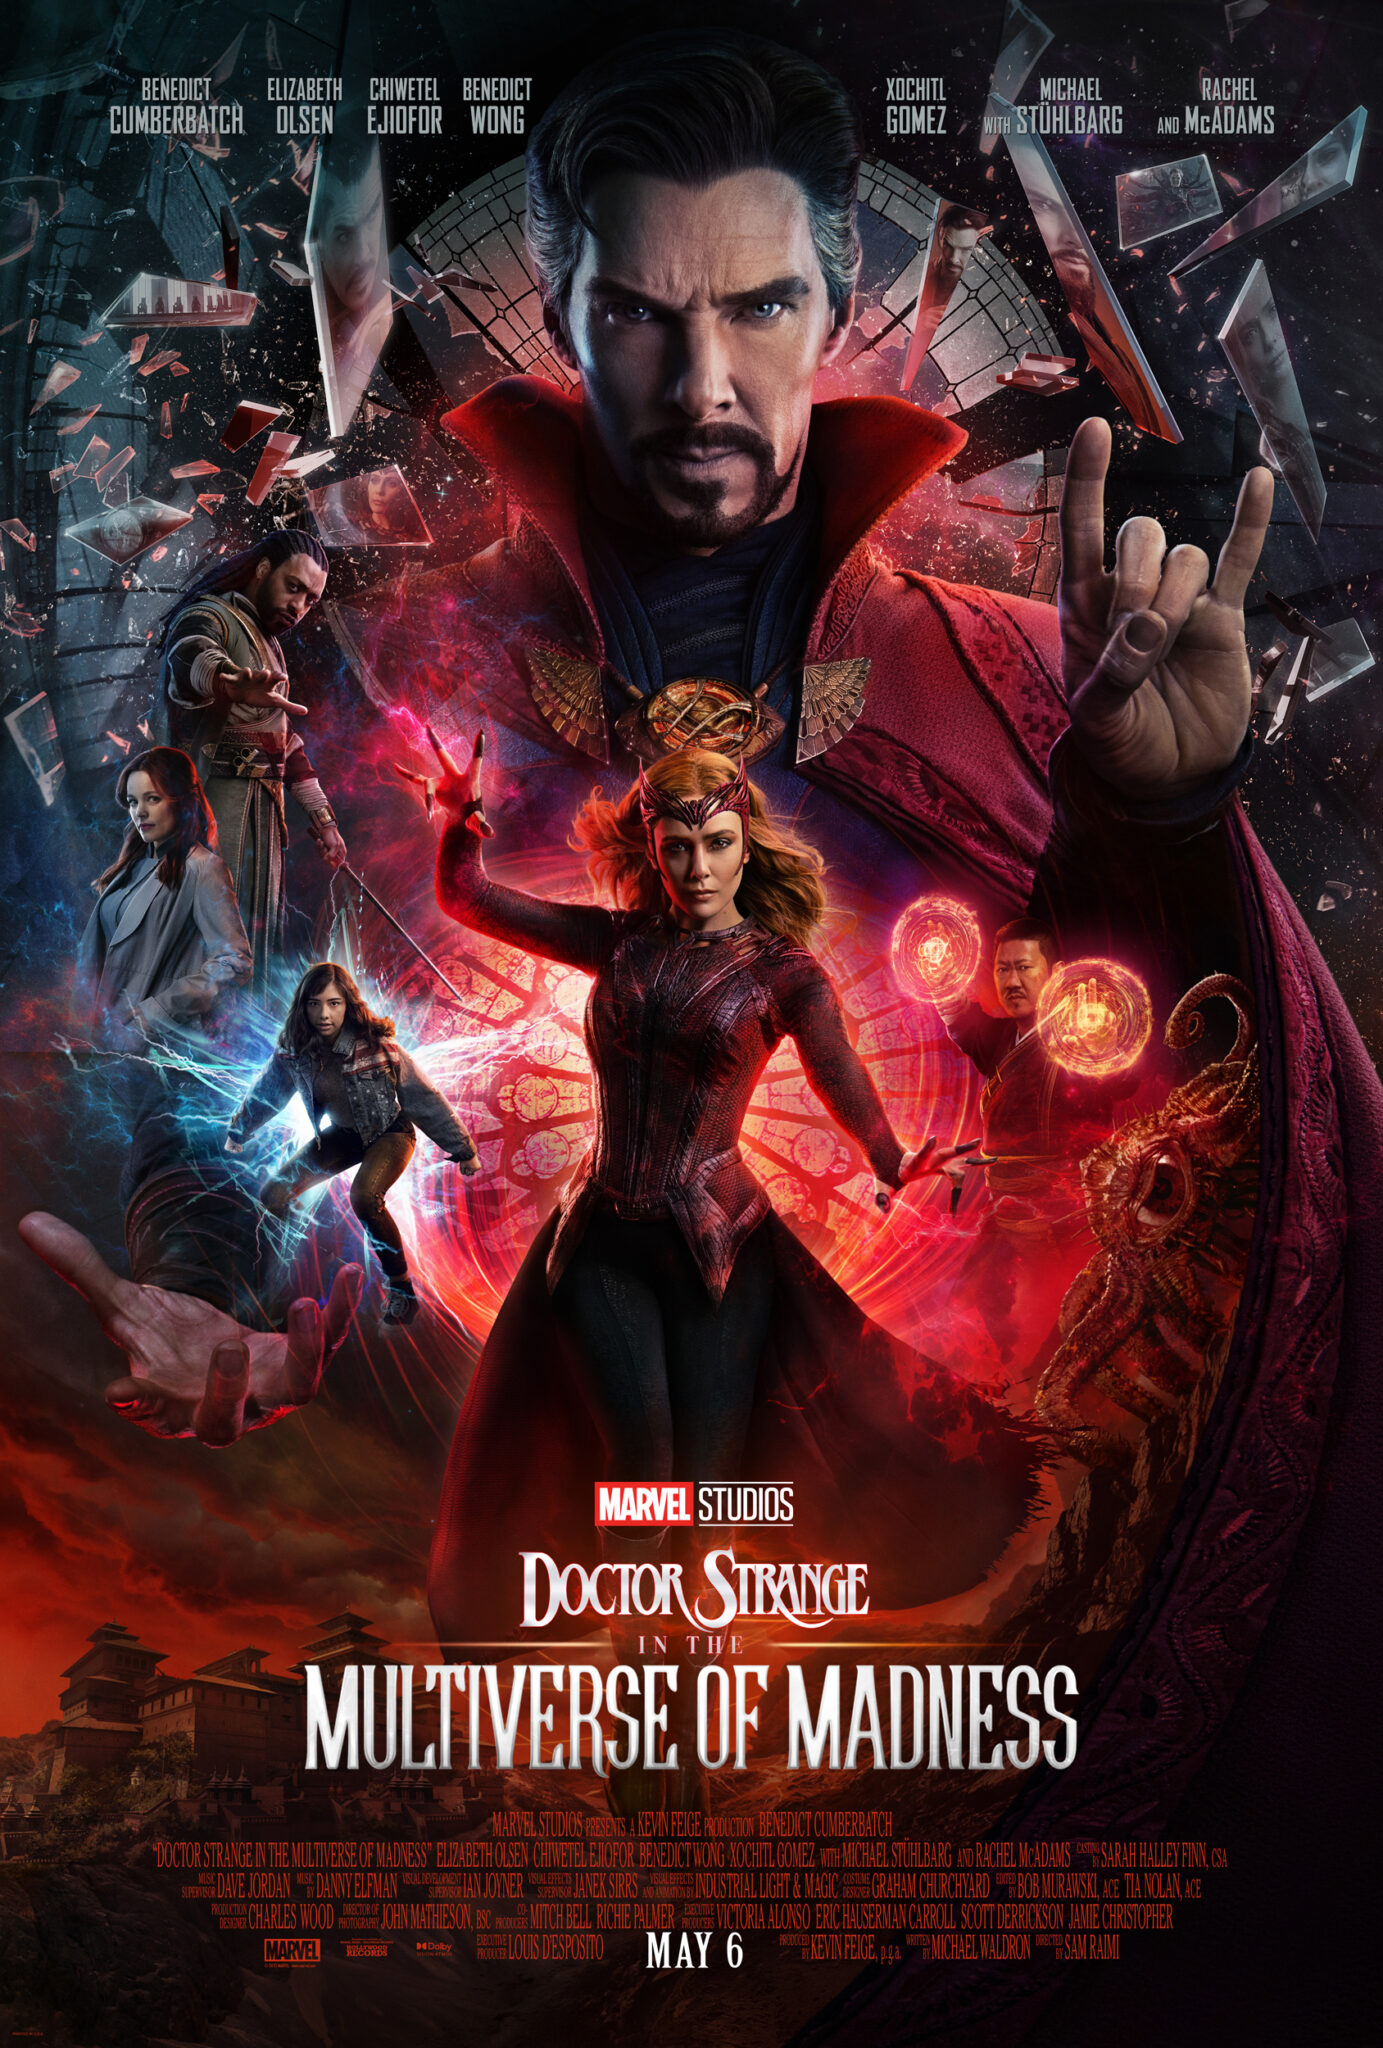 “Doctor Strange in the Multiverse of Madness” opens May 6 in theaters only.